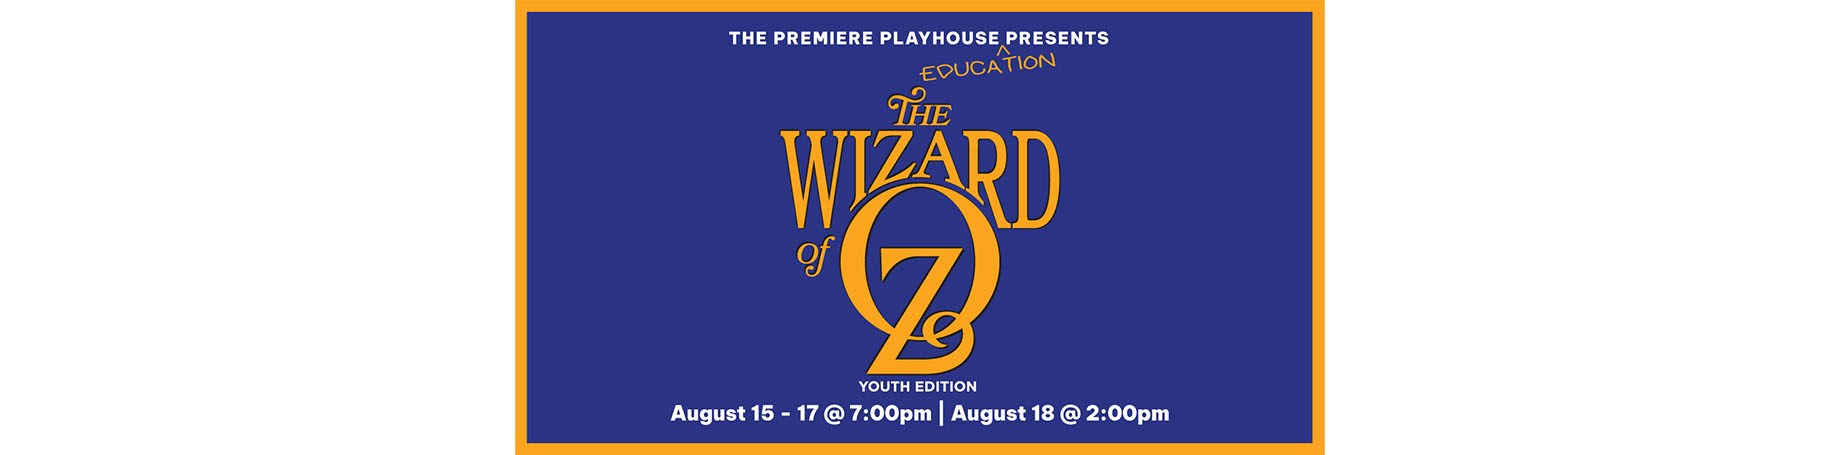 The Premiere Playhouse presents The Wizard of Oz